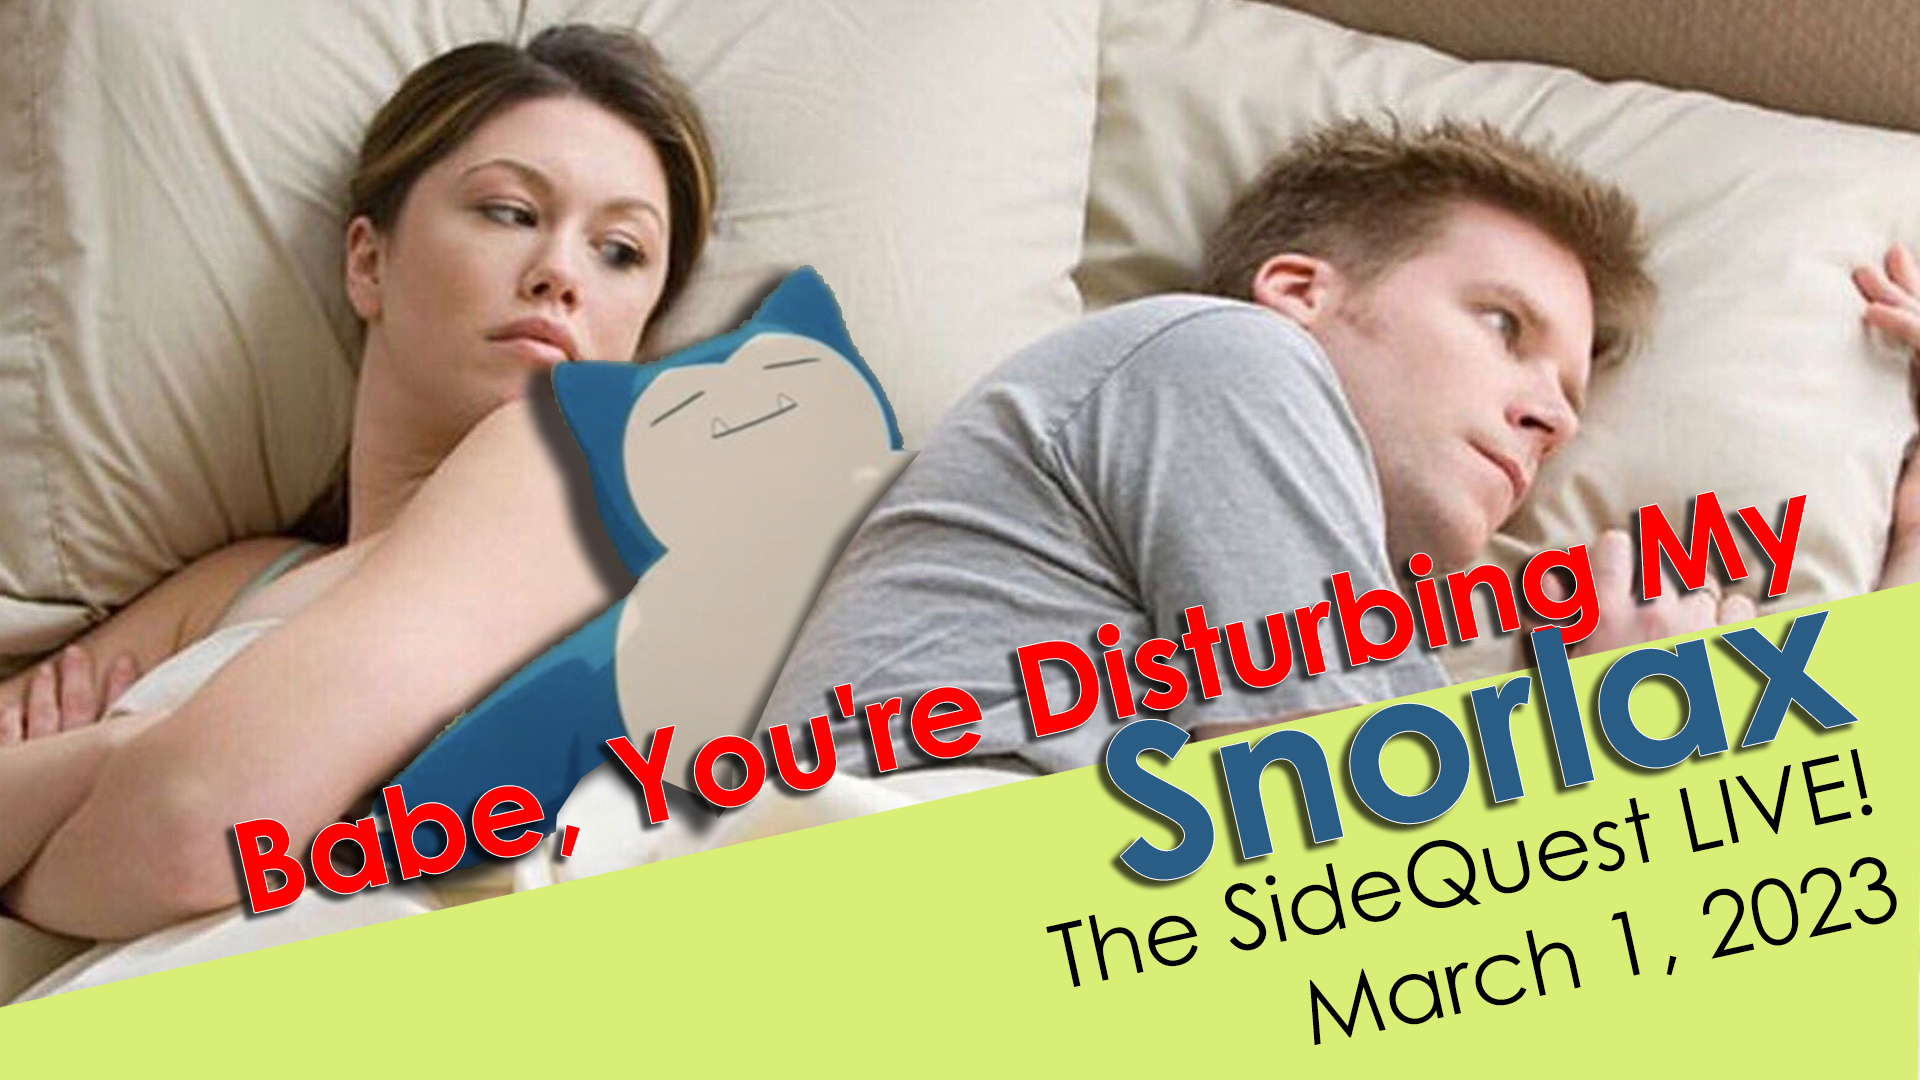 The SideQuest LIVE! March 1st, 2023: Babe, You’re Disturbing My Snorlax